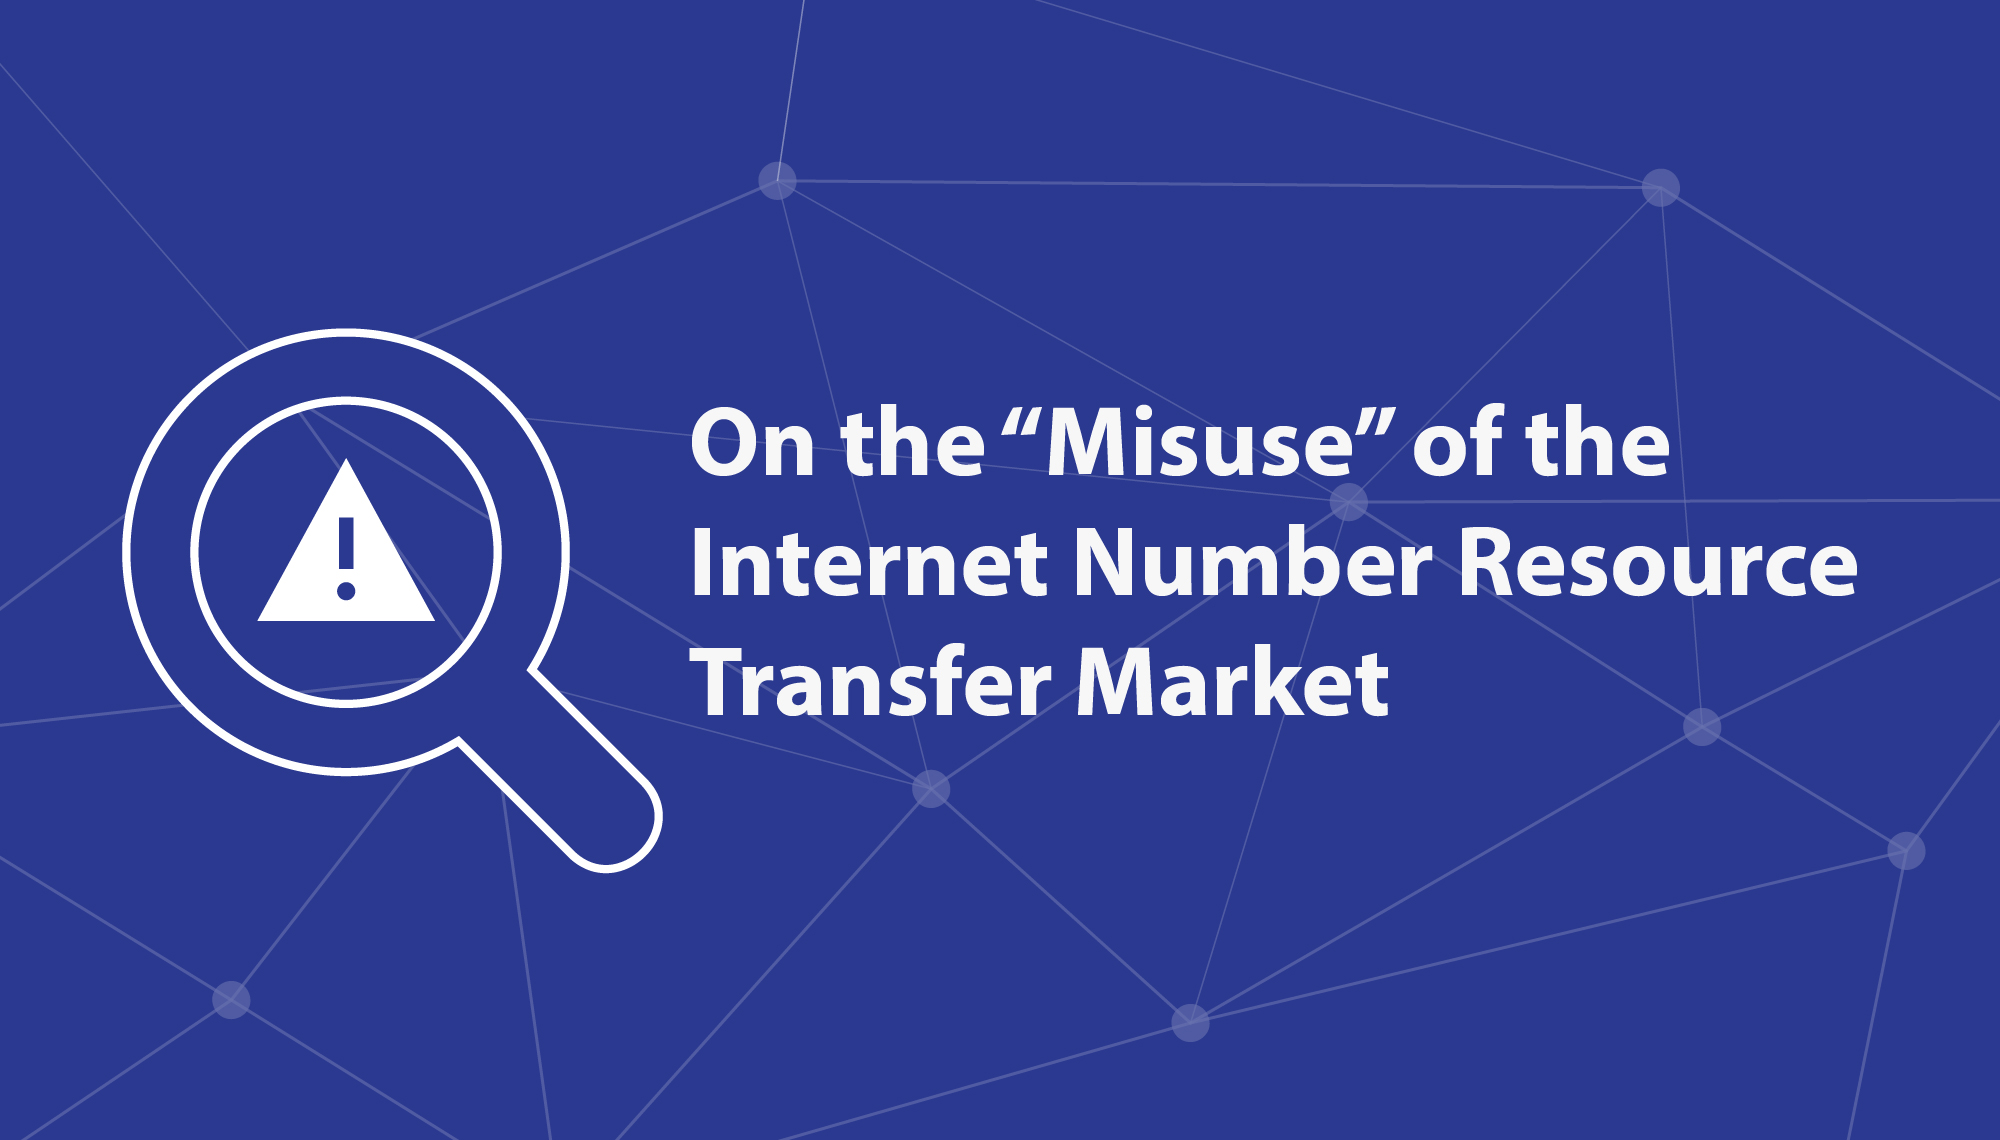 On the “Misuse” of the Internet Number Resource Transfer Market